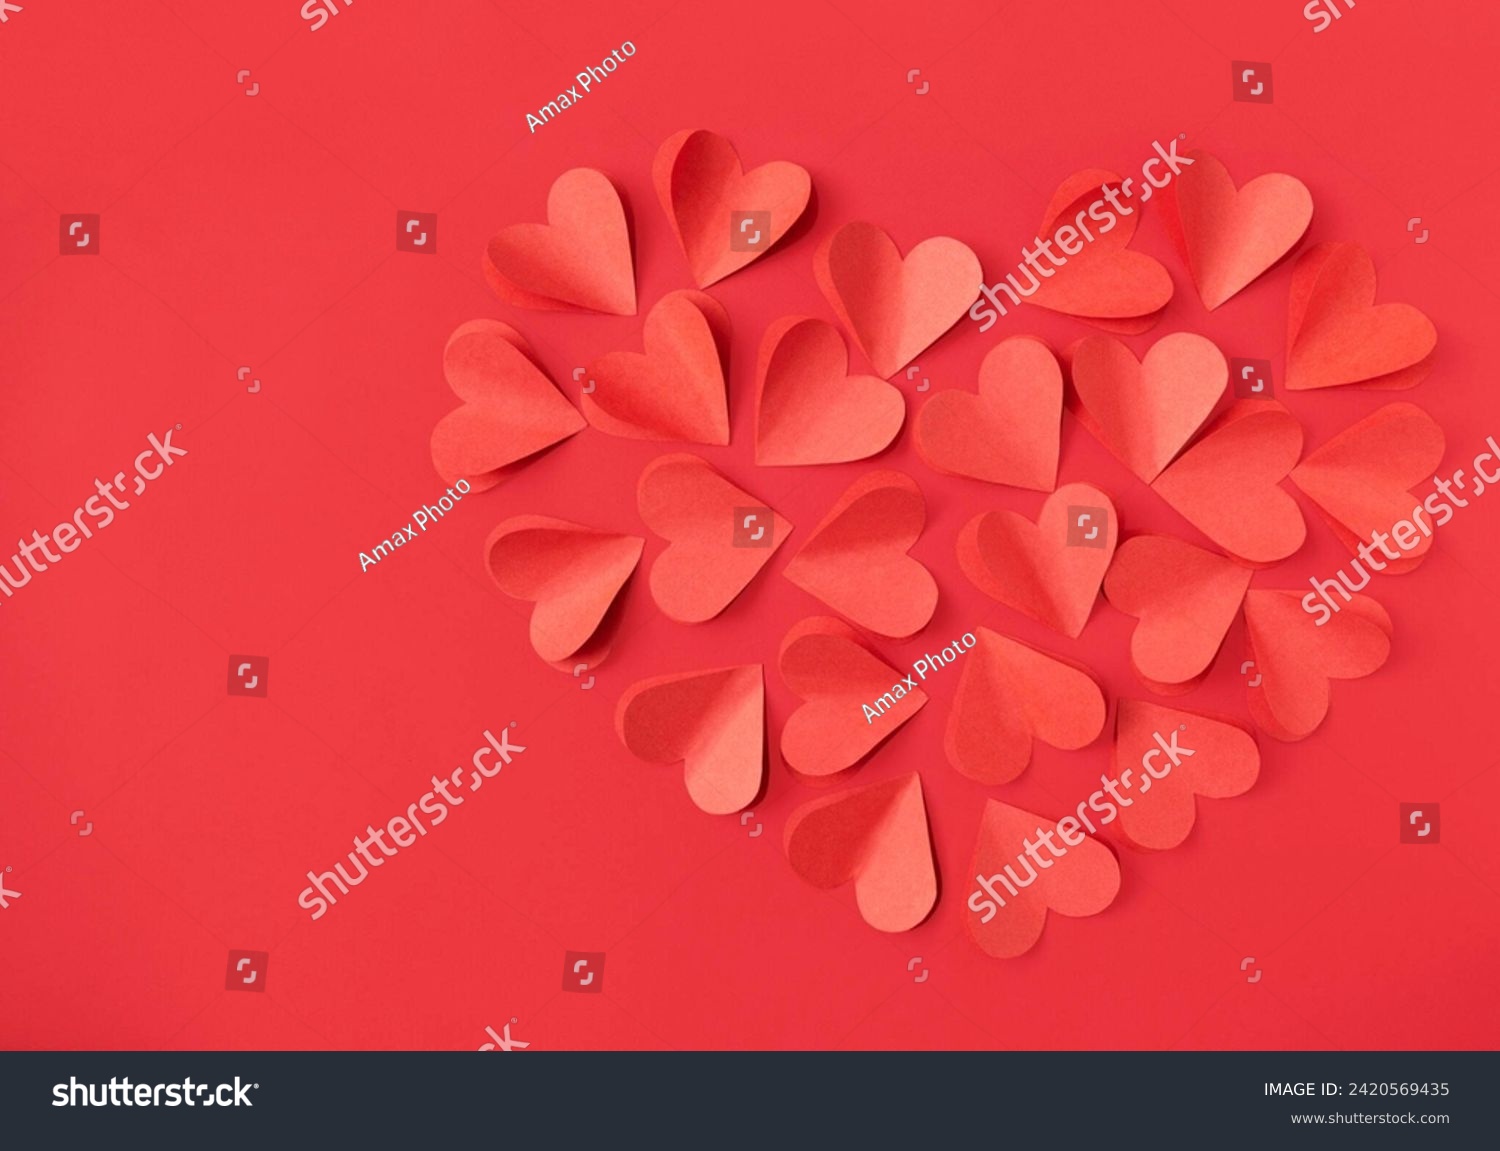 Valentine's Day background with red hearts on red background with copy space #2420569435